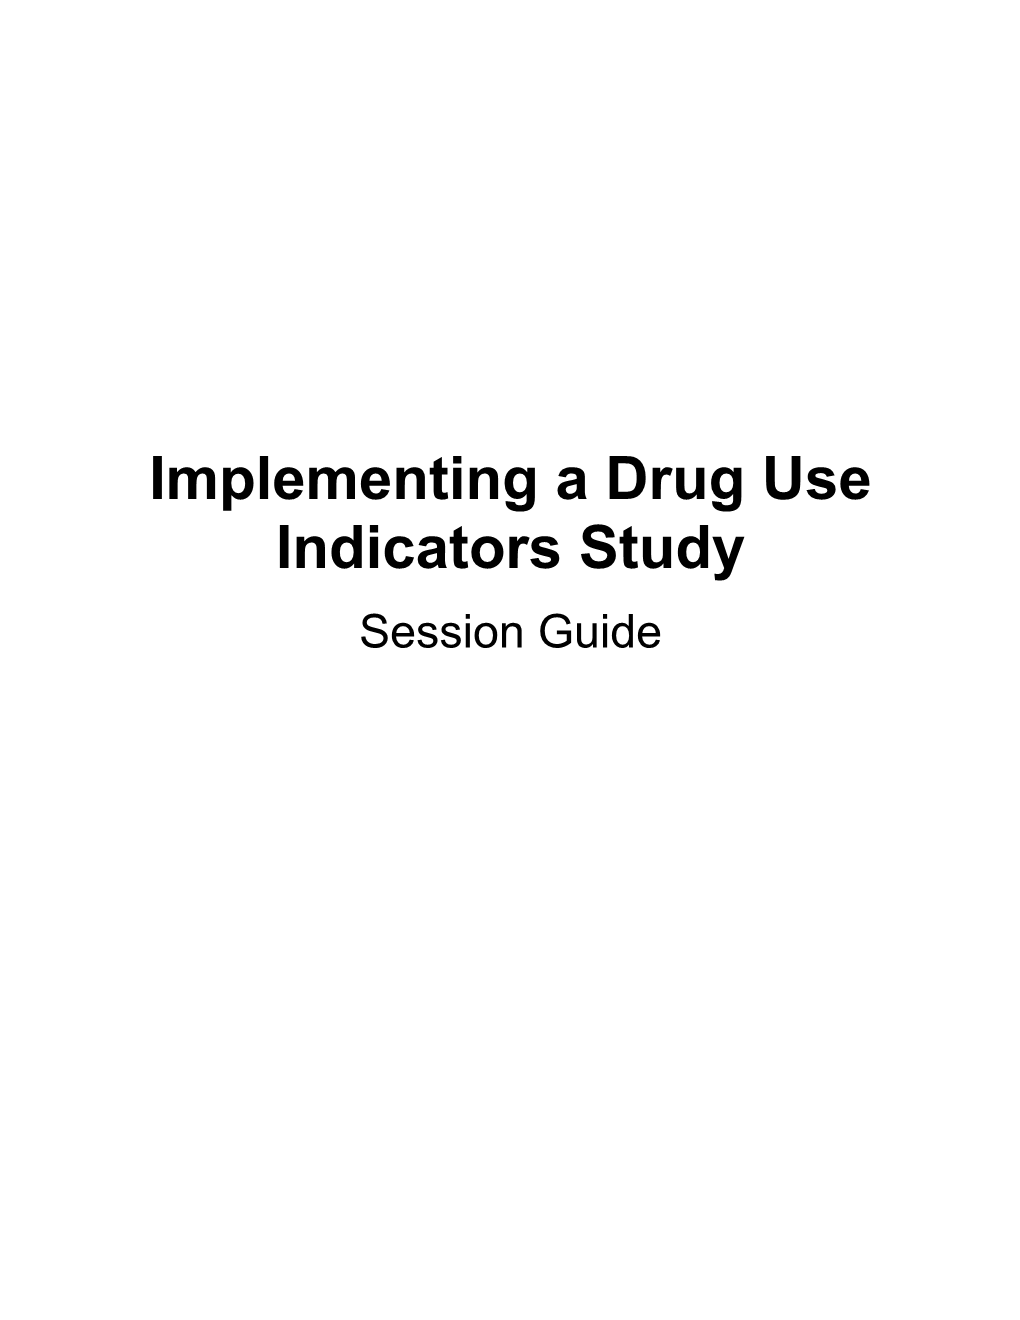 Implementing a Drug Use Indicators Study